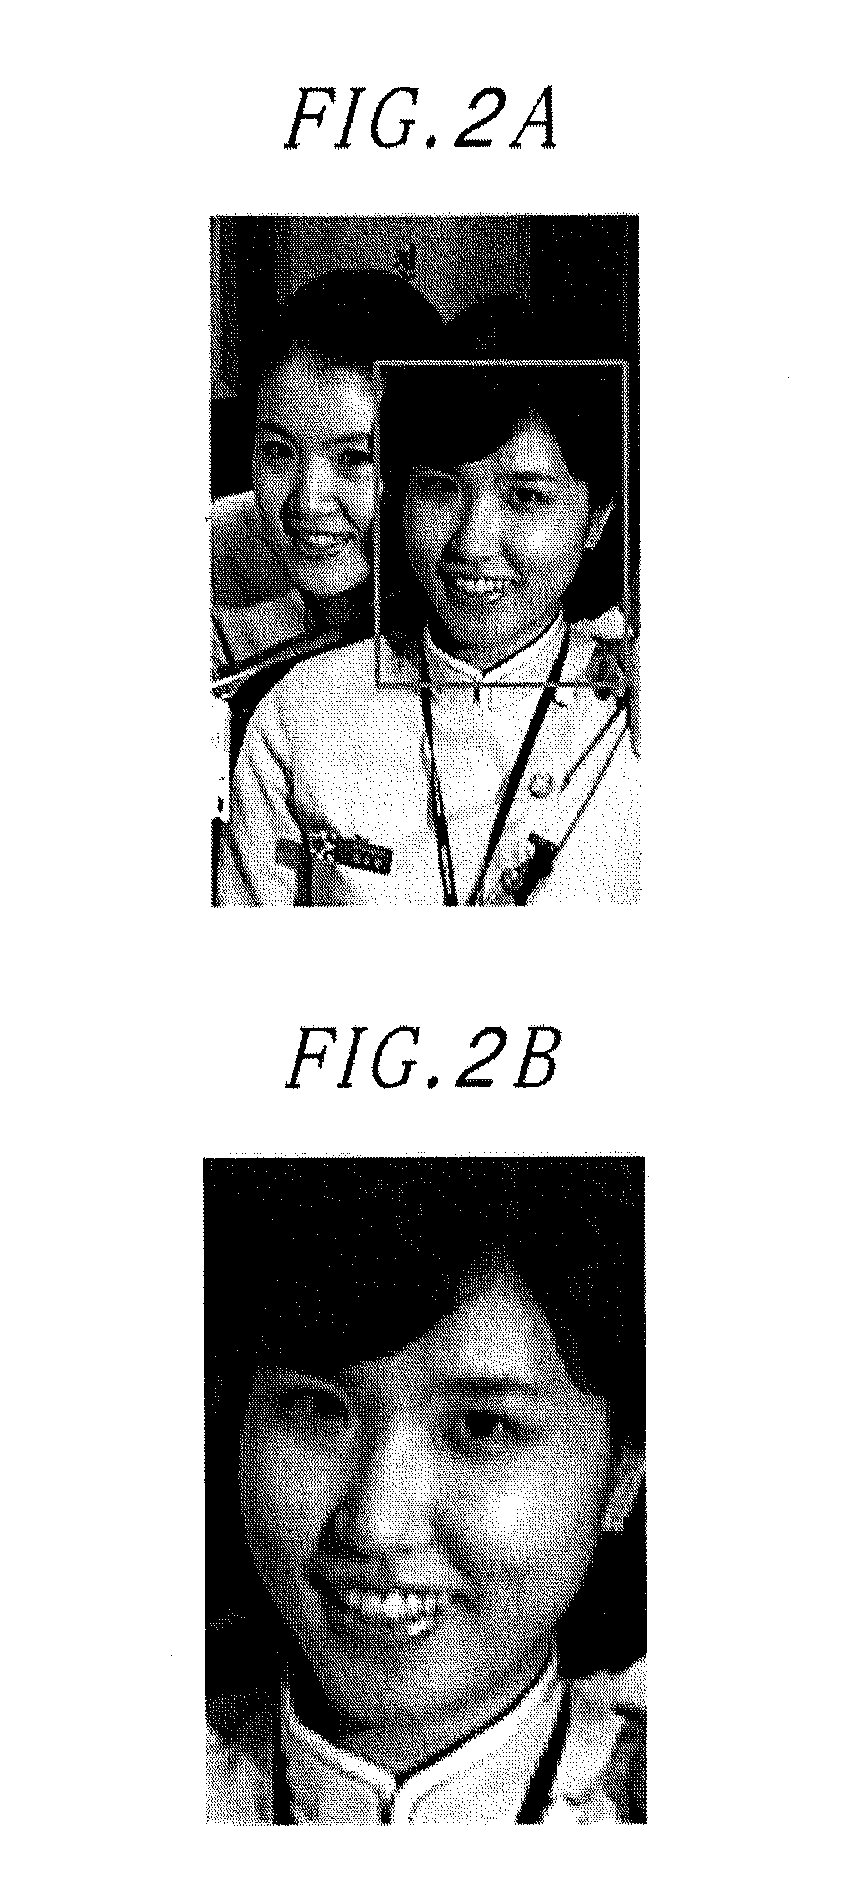 Method and apparatus for generating face avatar